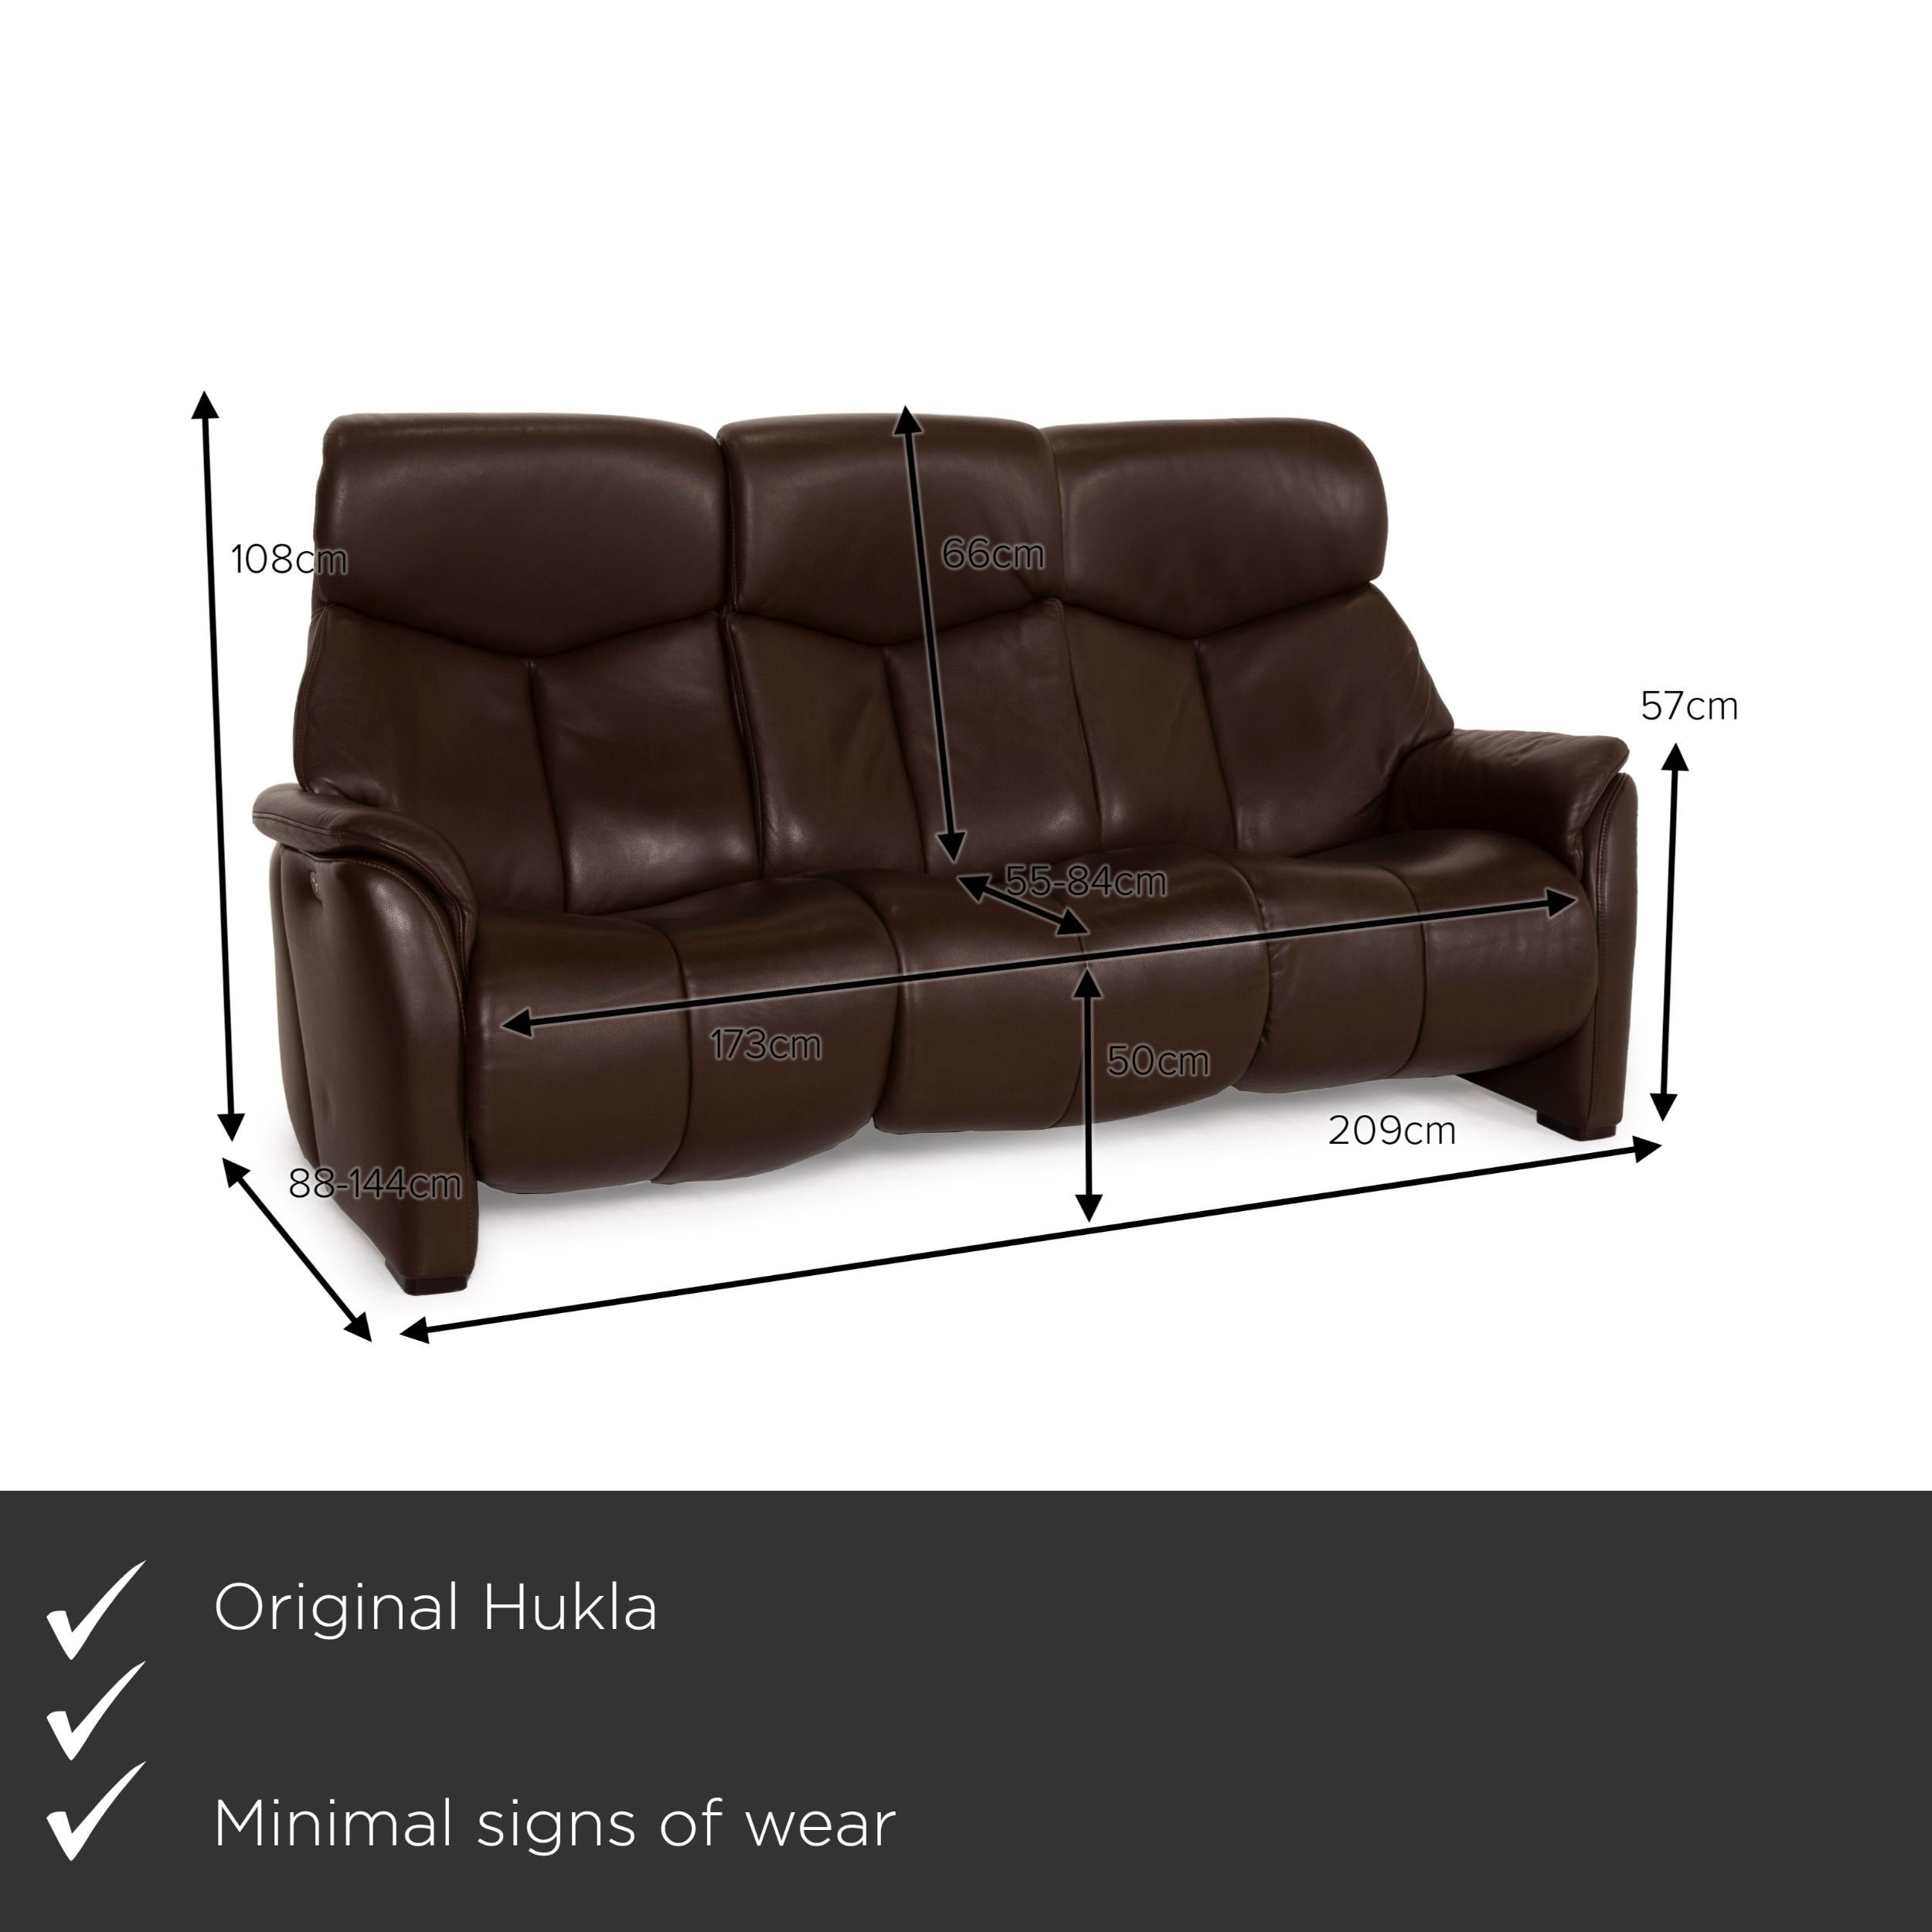 We present to you a Hukla Nevada leather sofa brown three-seater electric relaxation function dark.
  
 

 Product measurements in centimeters:
 

 depth: 88
 width: 209
 height: 108
 seat height: 50
 rest height: 57
 seat depth: 55
